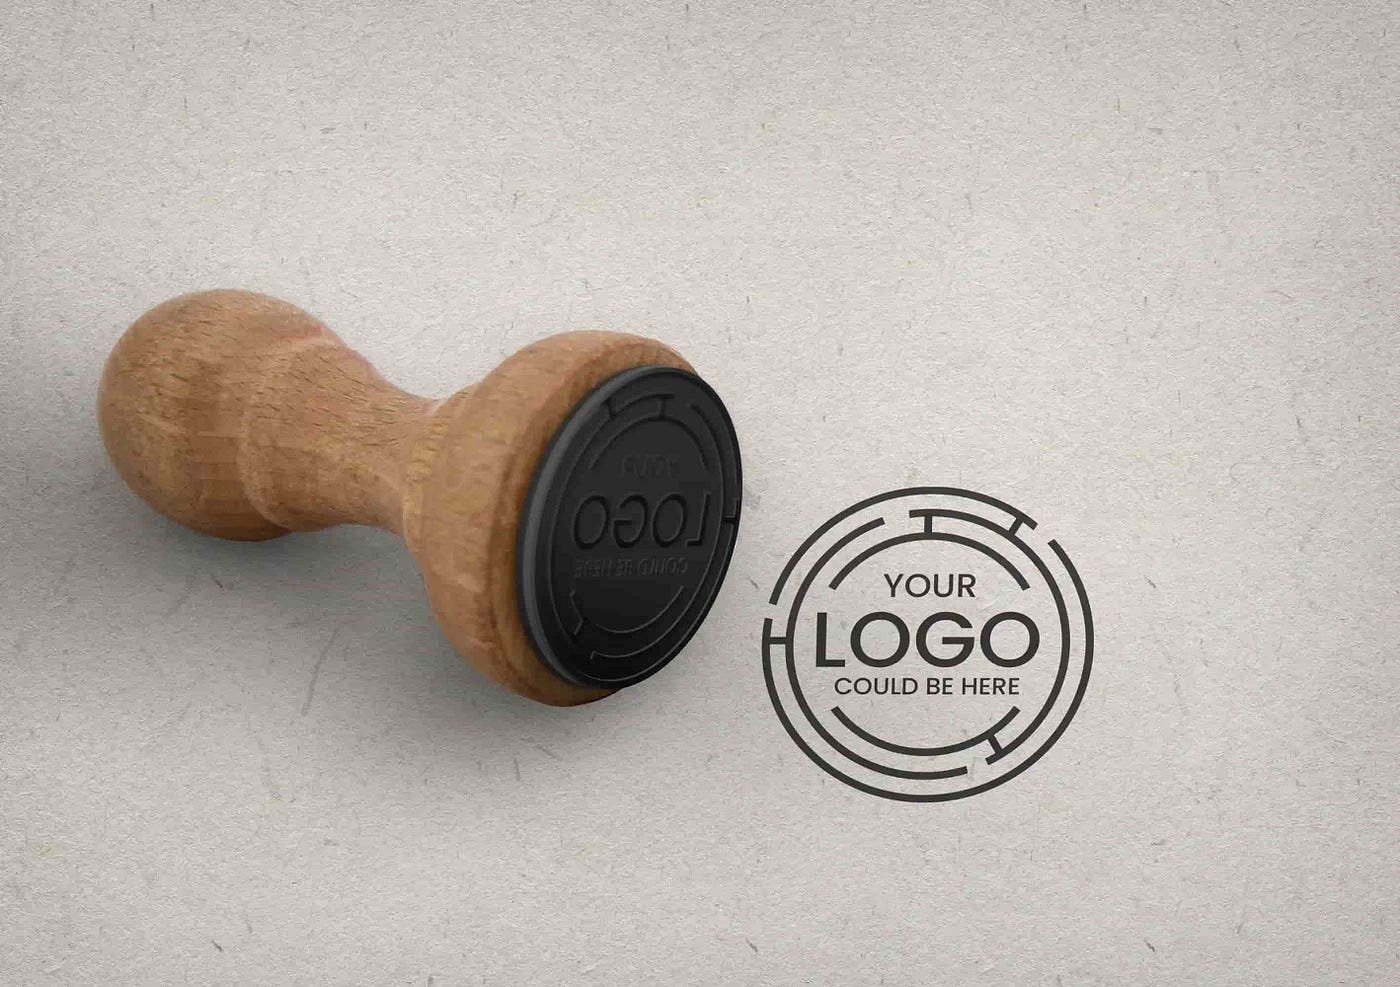 How to Design Your Own Company Stamp Using Your Logo?, by Create Your Own  Stamp